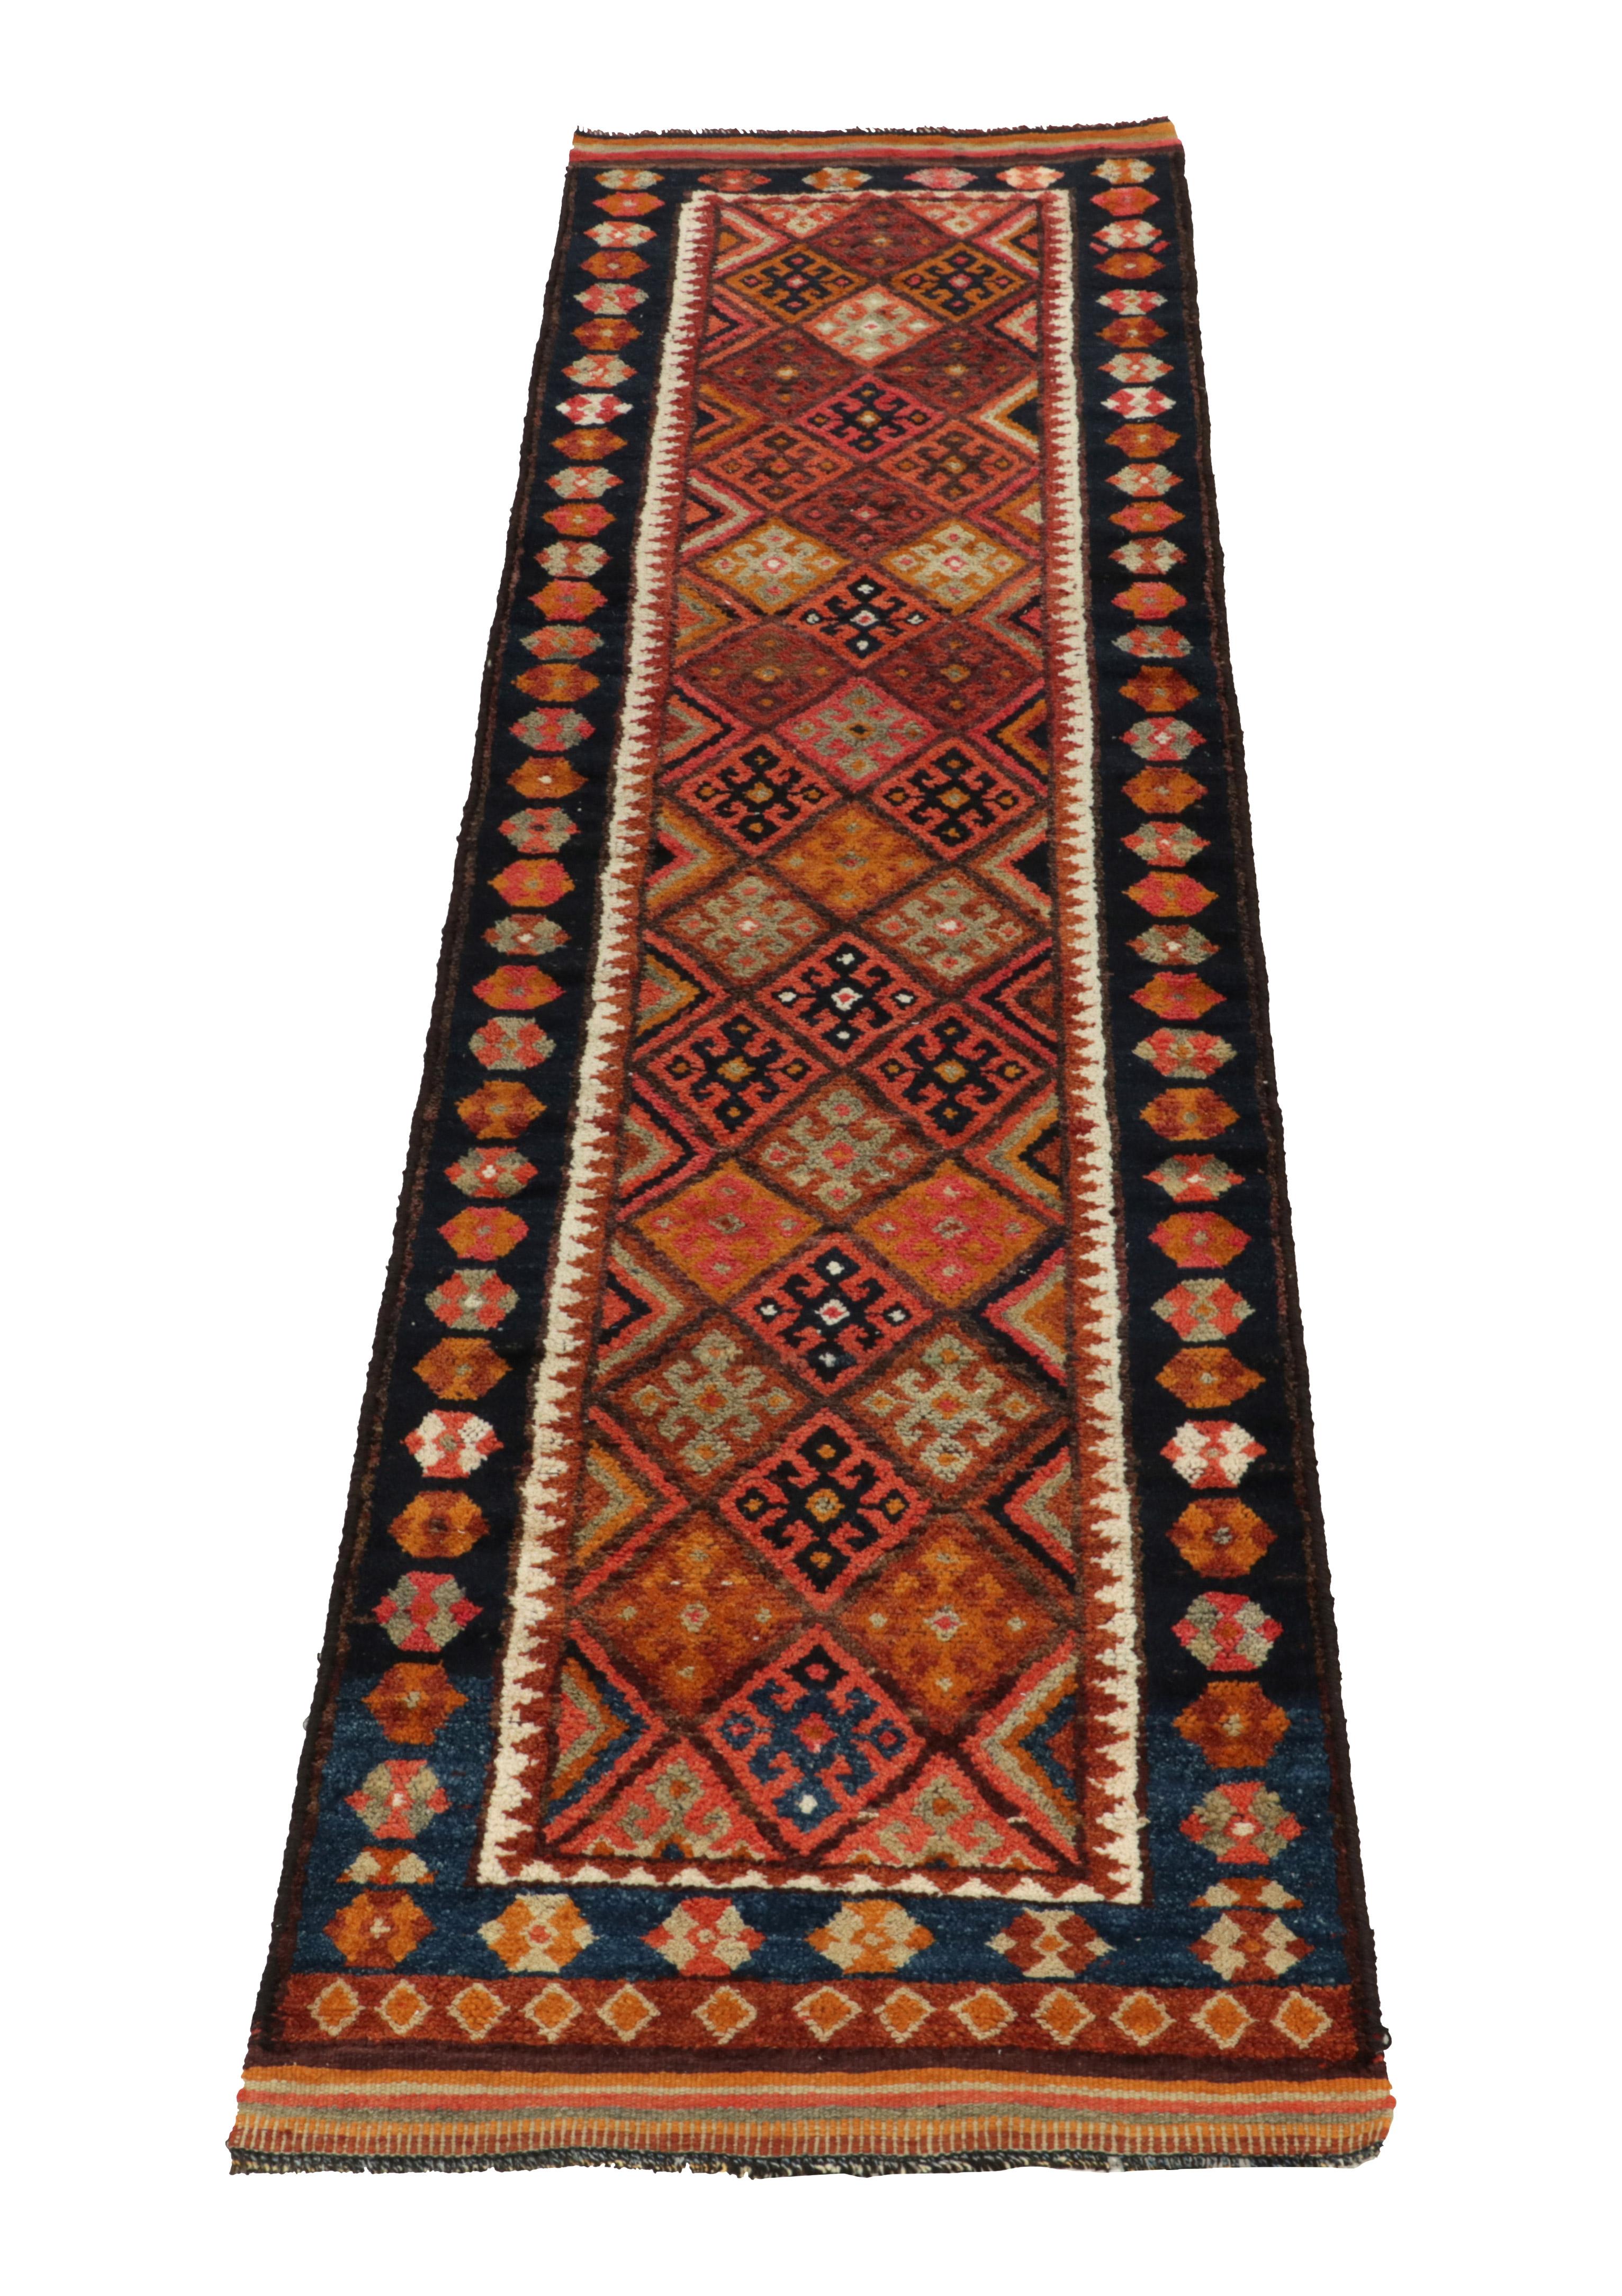 Hand-knotted in wool, a 3x11 runner from Rug & Kilim’s latest prominent curation of rare, rich tribal pieces. 

Originating from Turkey circa 1950-1960, the rug enjoys a diamond pattern on the field encasing traditional motifs in rich tones of